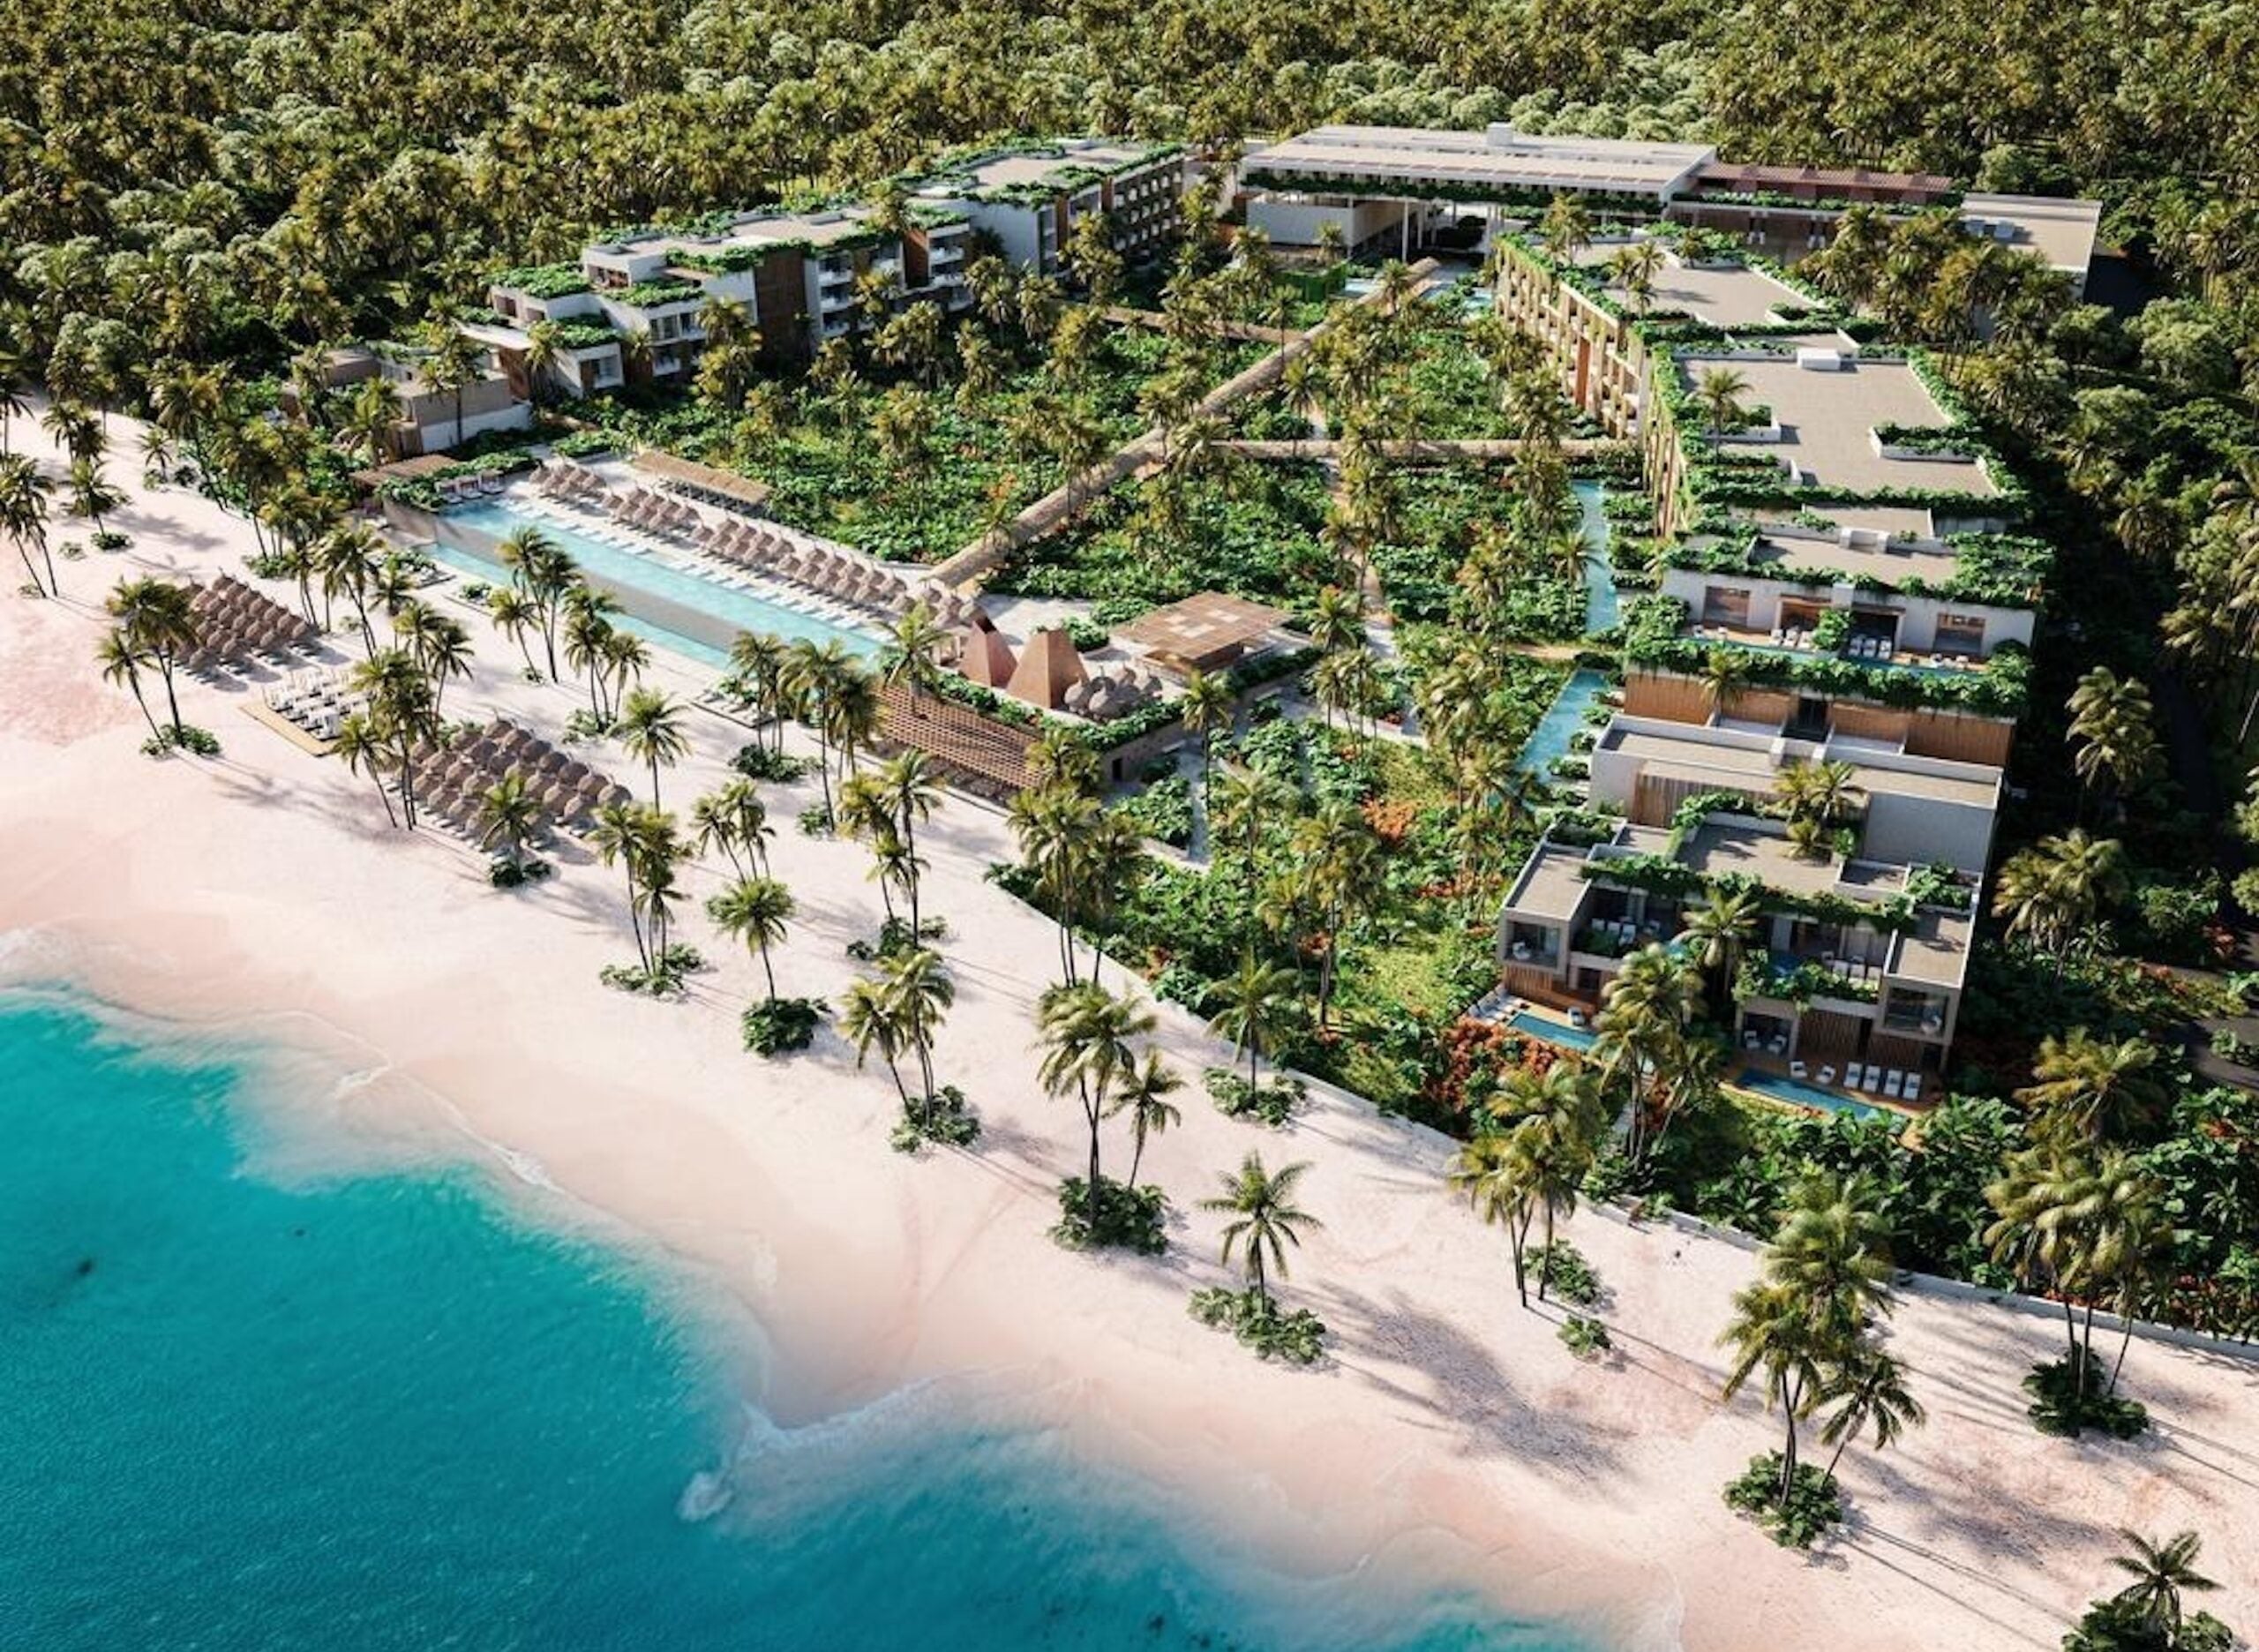 Marriott plans to open an all-inclusive W Hotel in the Dominican Republic